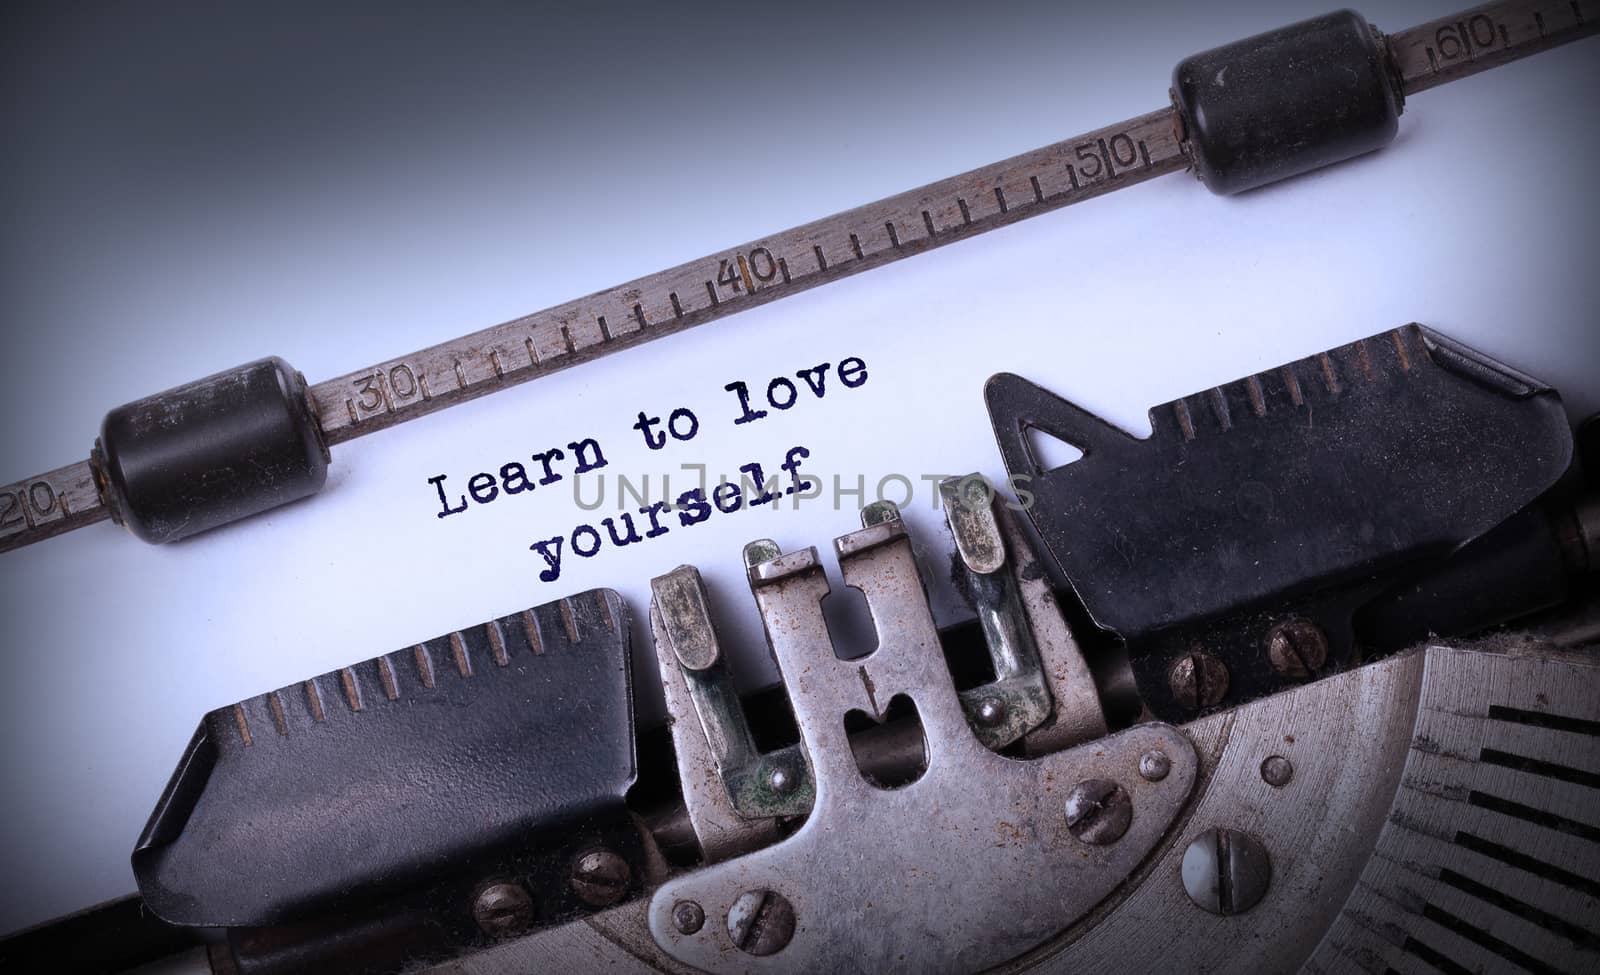 Vintage inscription made by old typewriter, Learn to love yourself